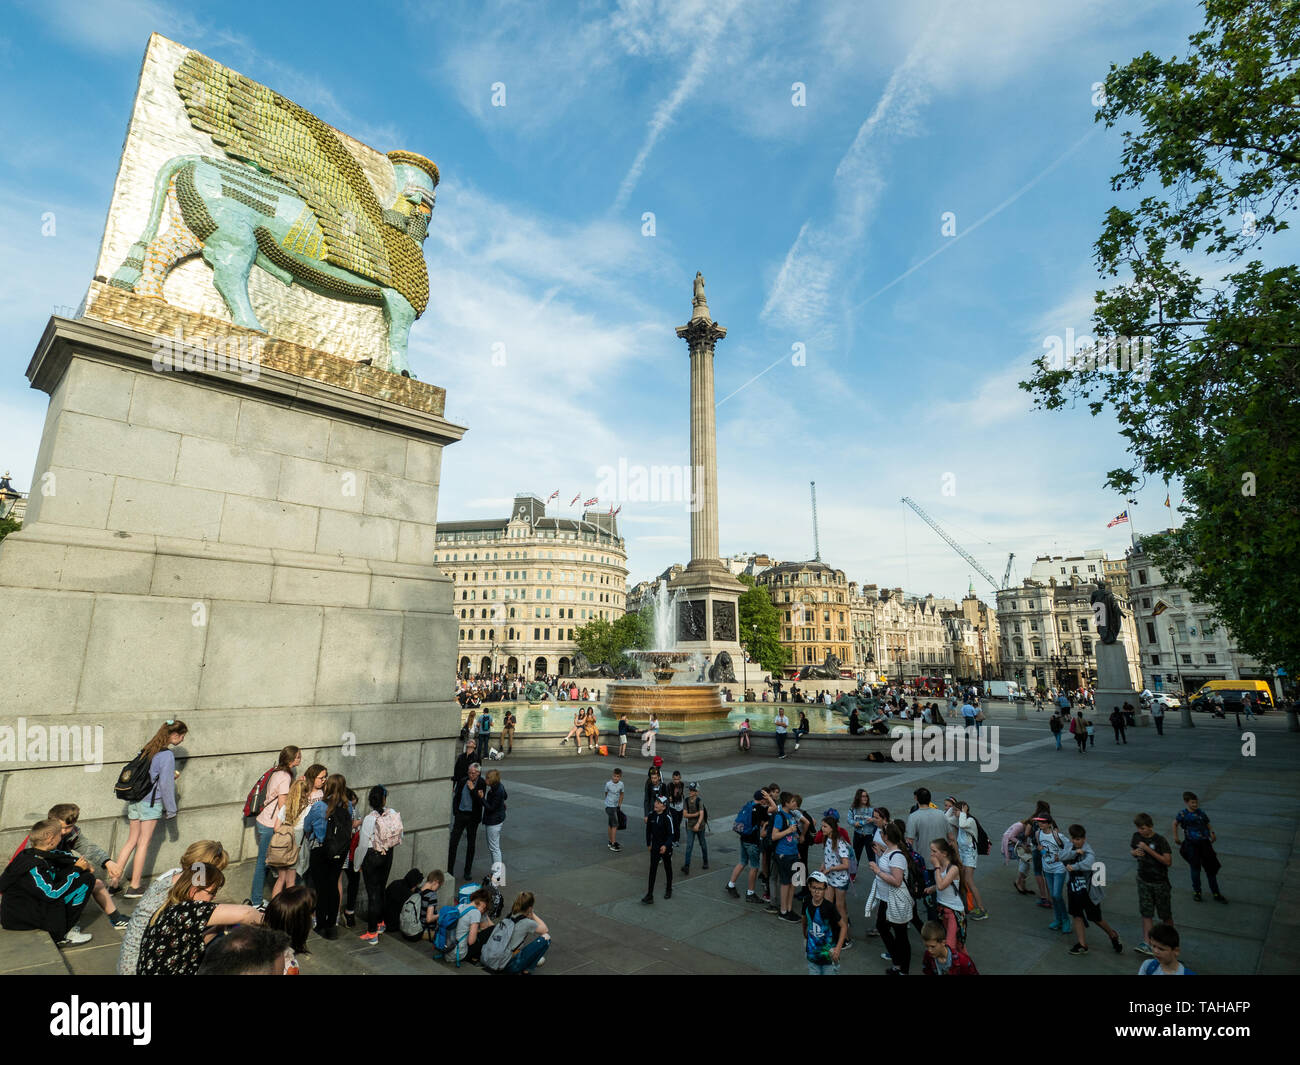 Trafalgar Sq. London. On the left is a recreaton of the Lamassu (Winged Bull) by artist Michael Rakowitz made from 10,500 empty Iraqi date syrup cans. Stock Photo